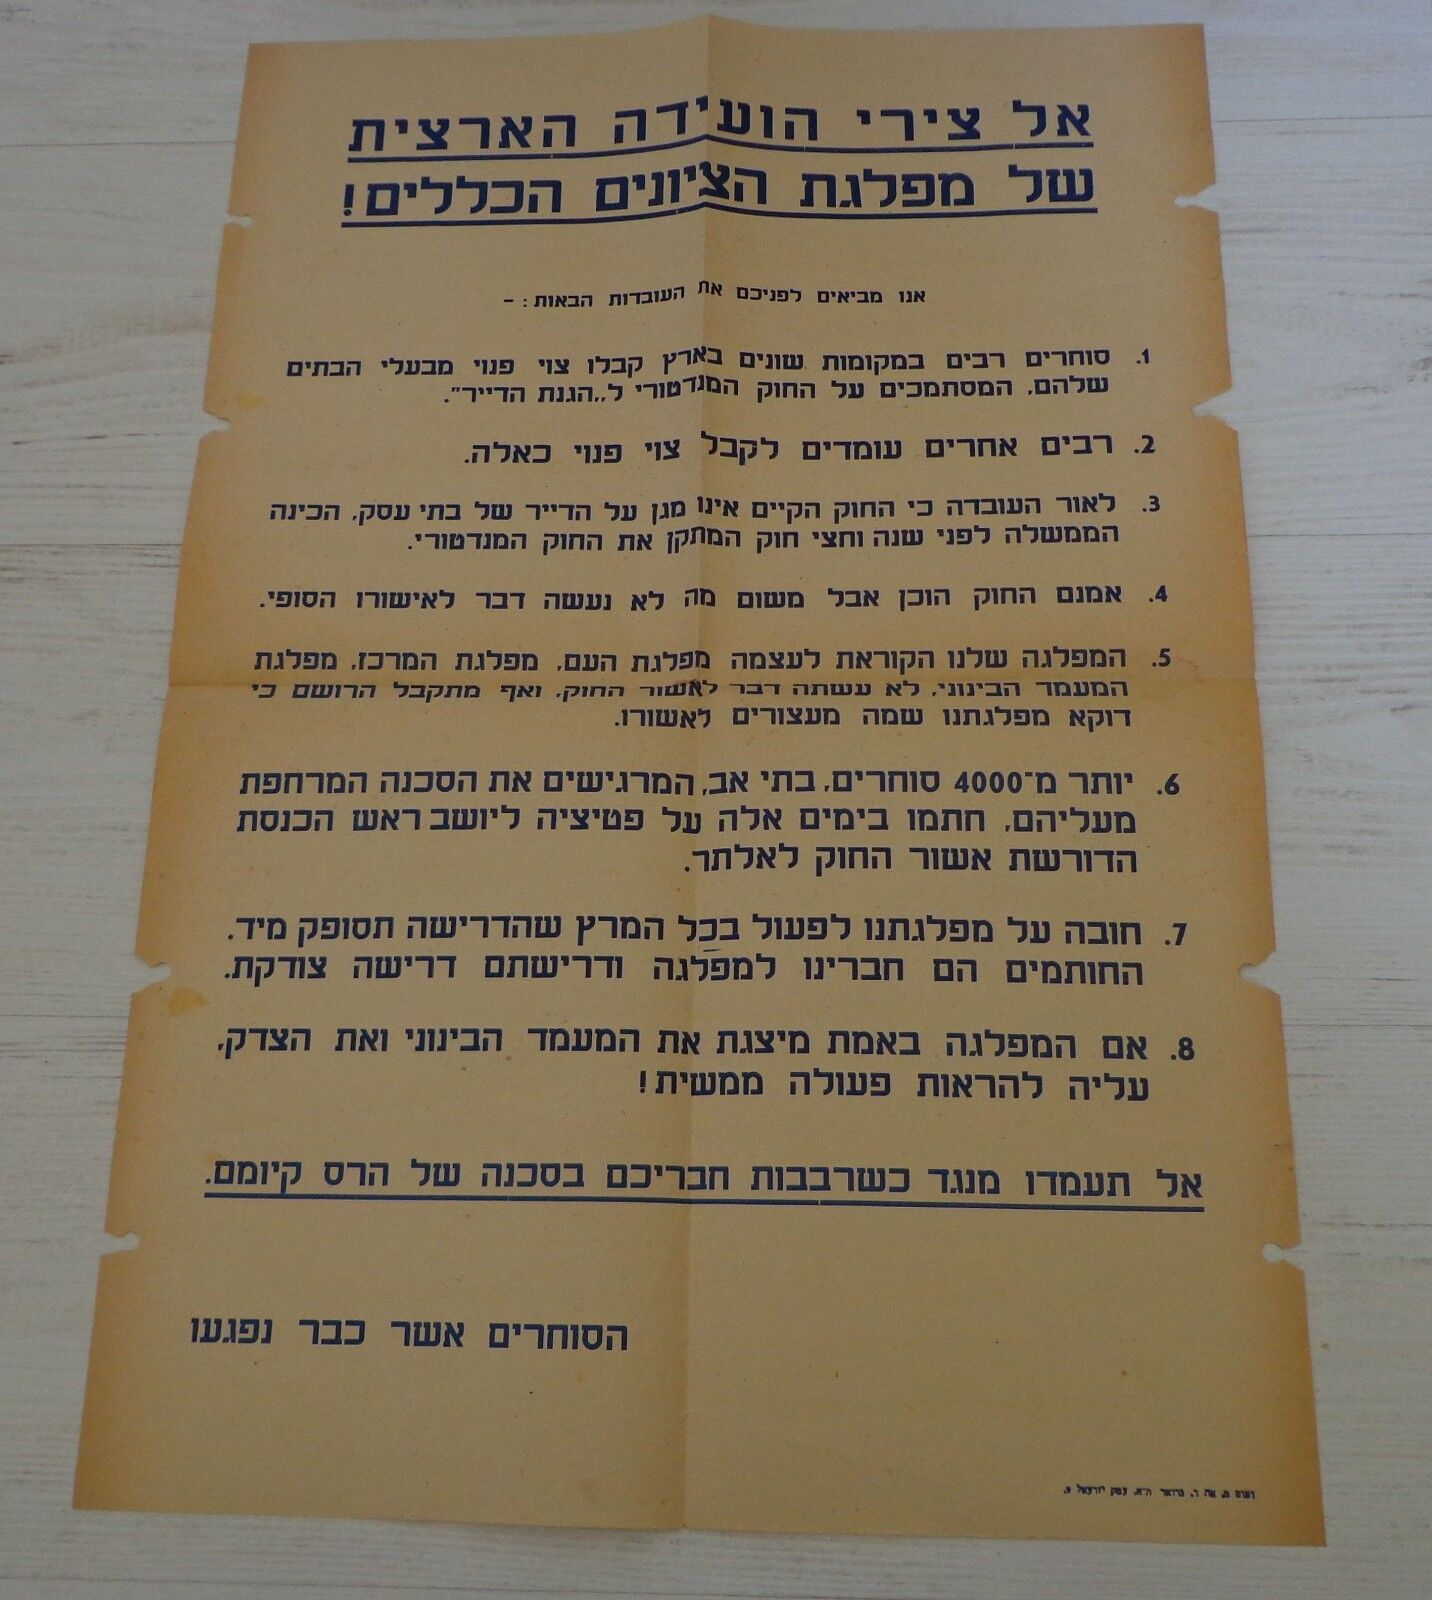 General Zionists political party Israel judaica poster propaganda poster